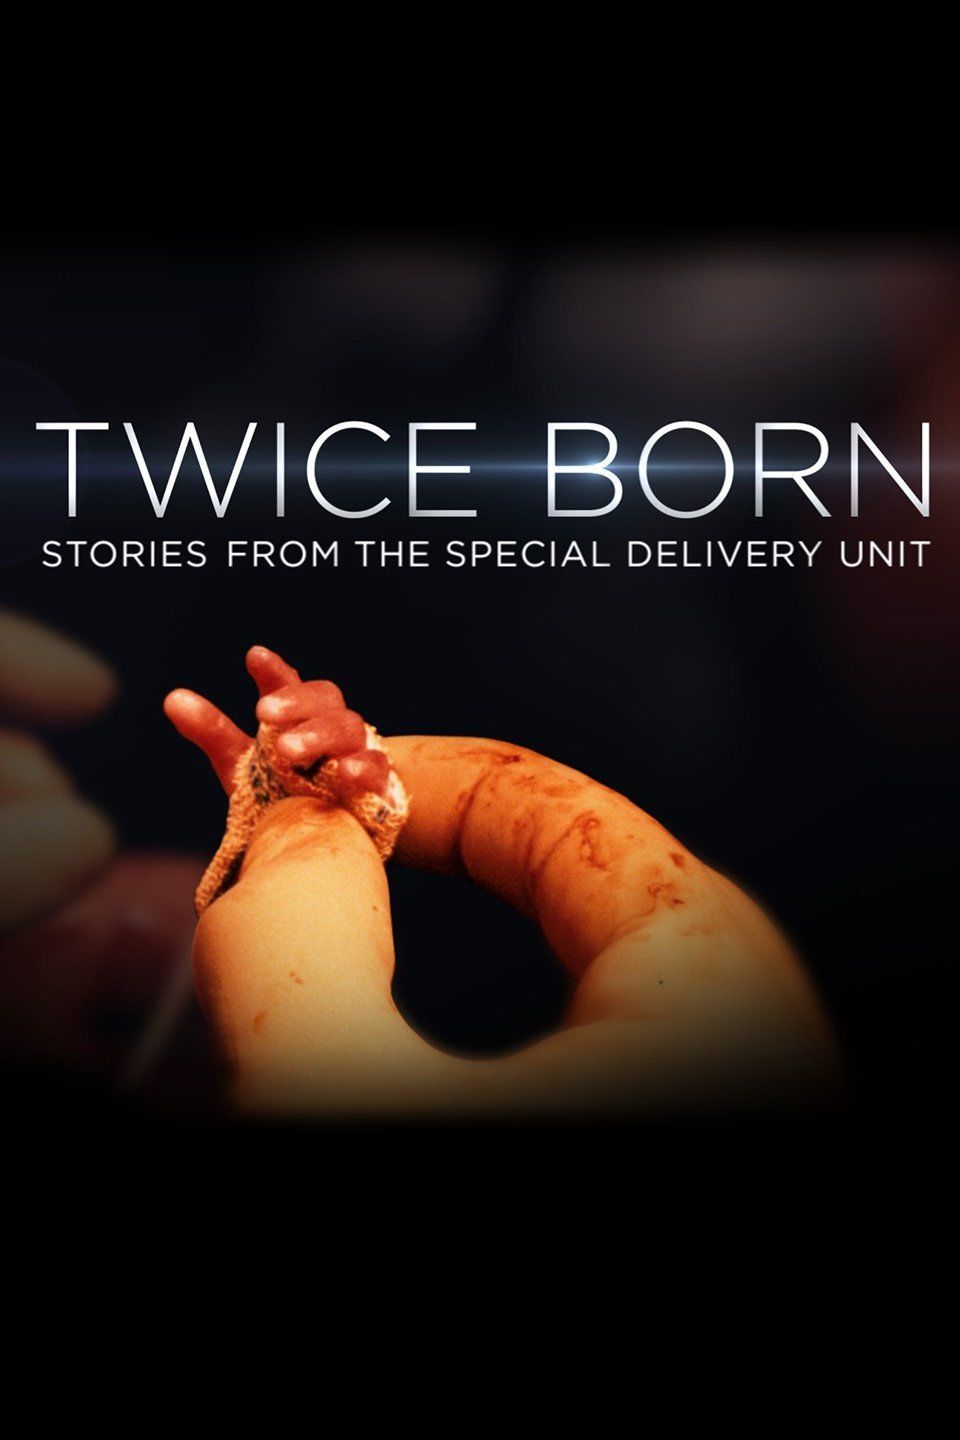 Twice Born: Stories from the Special Delivery Unit ne zaman